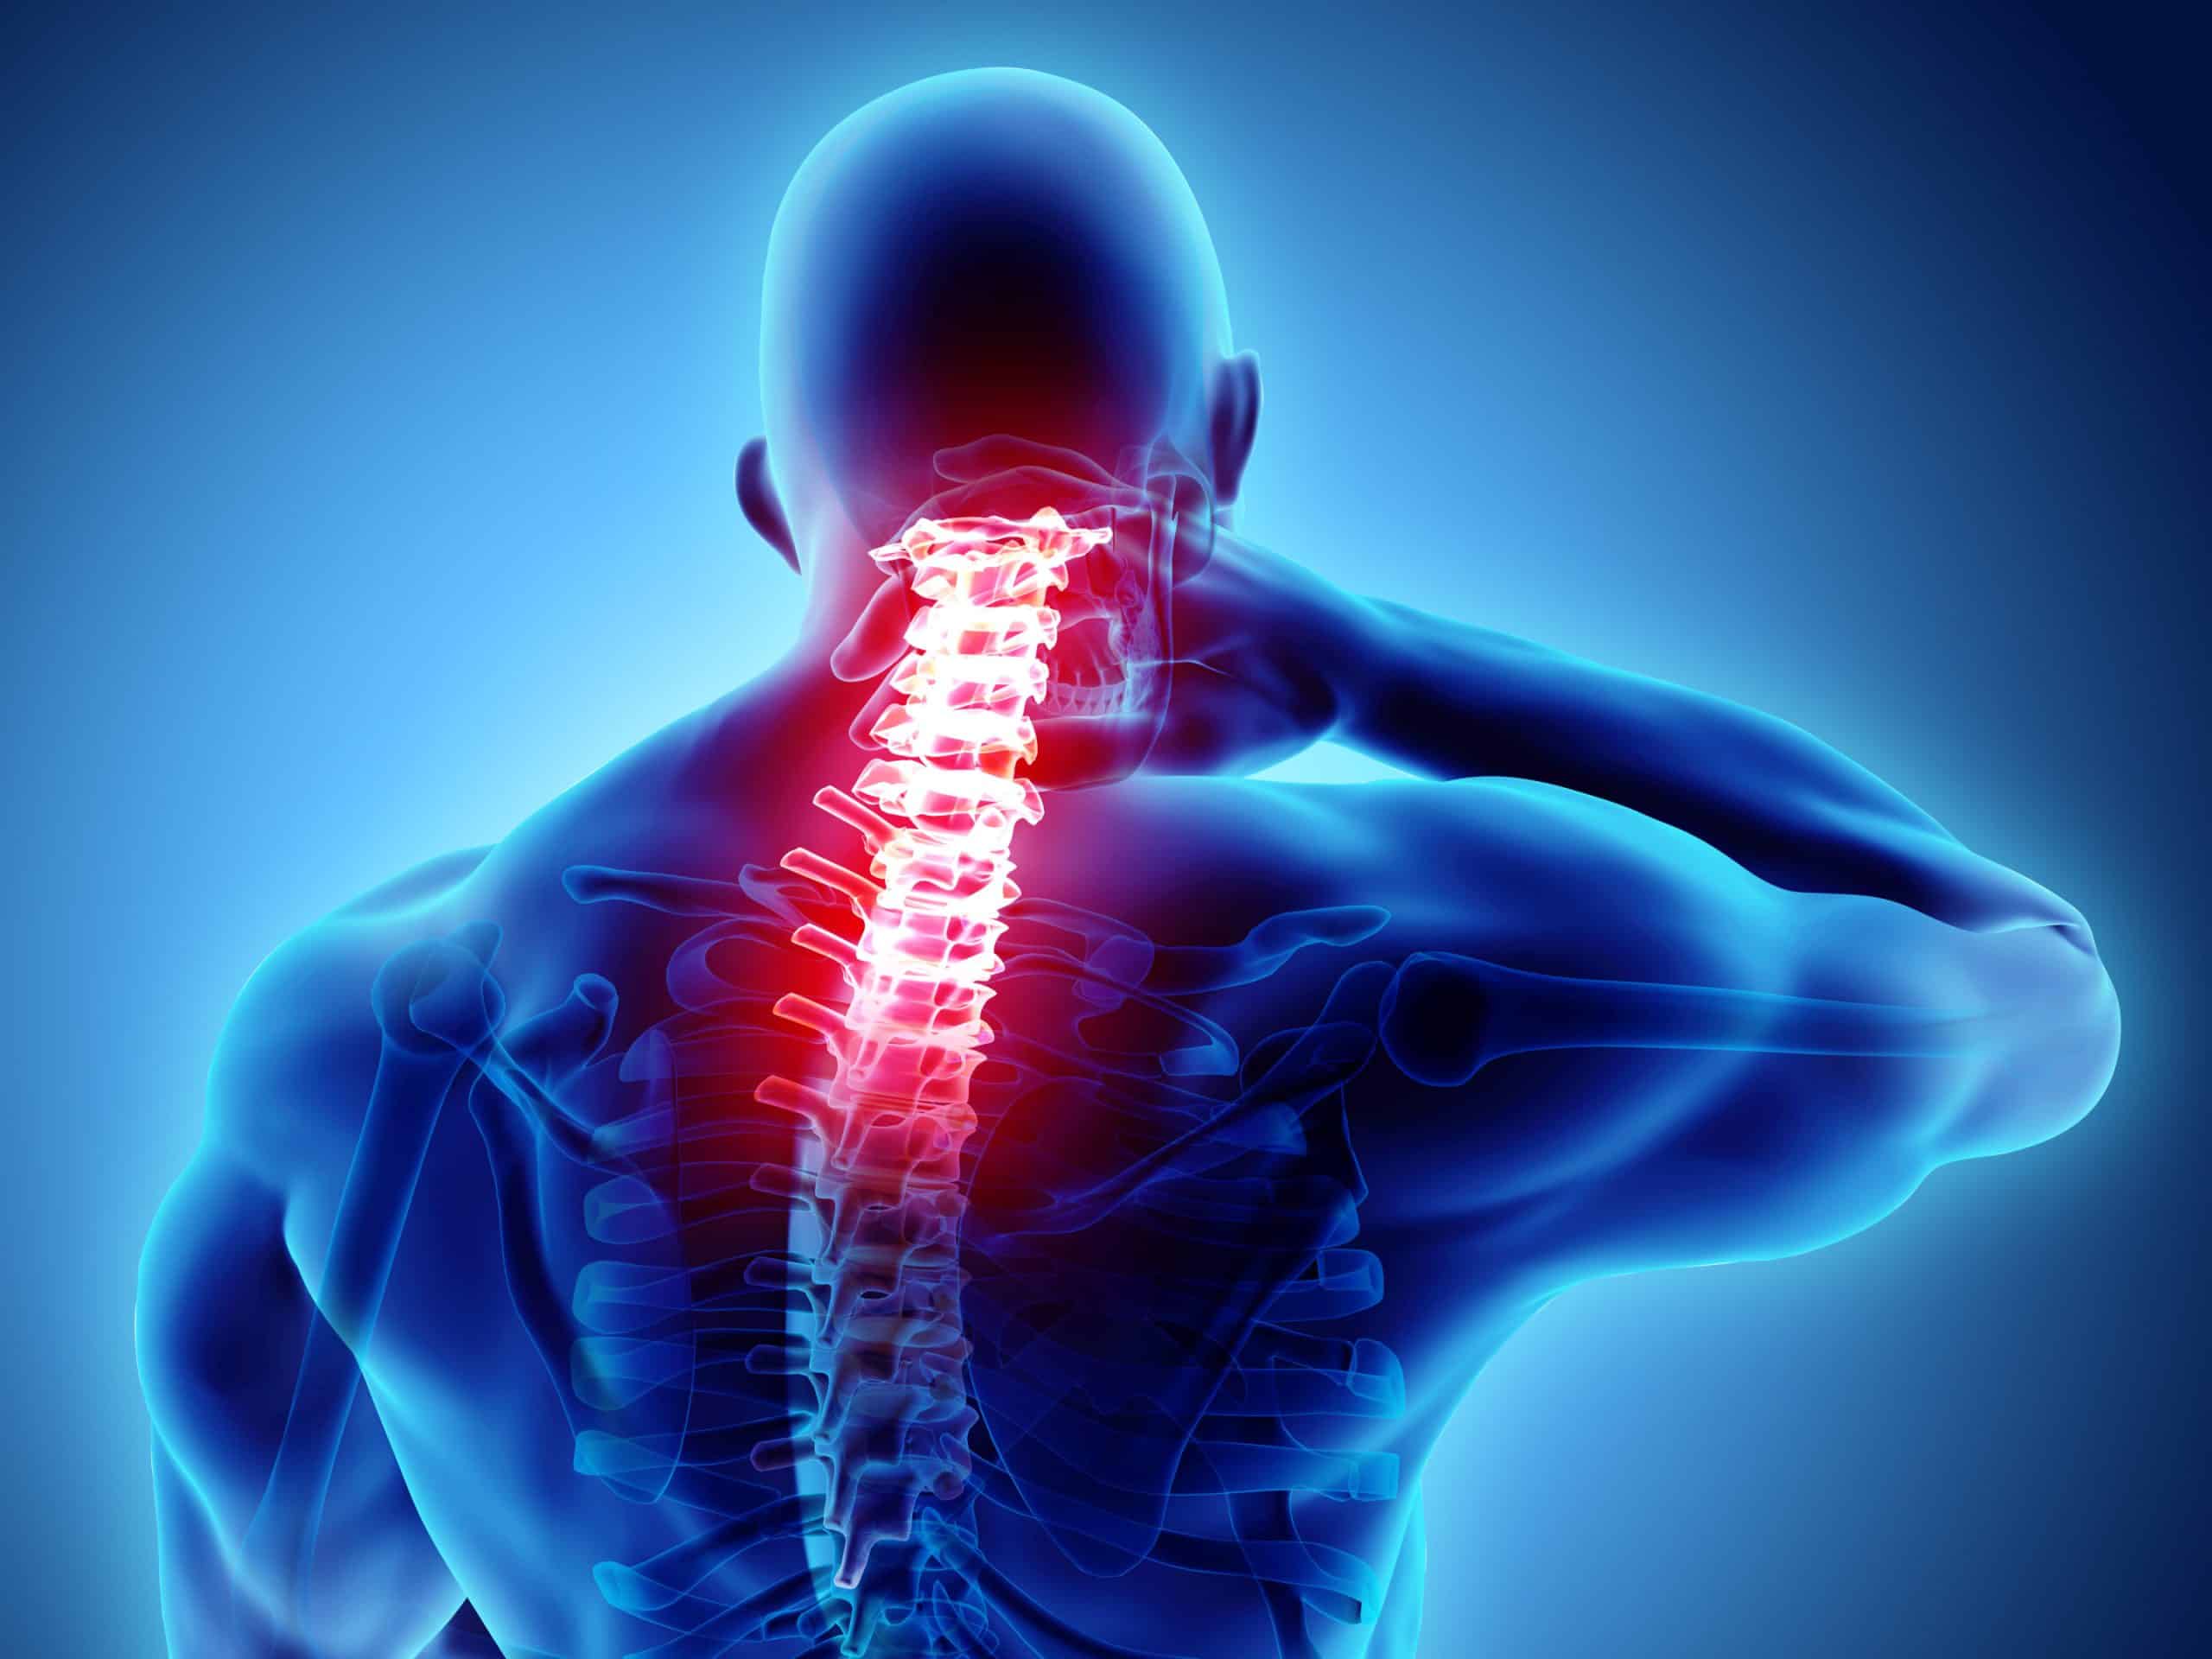 Neck Injury - Chronic Pain After Car Accident